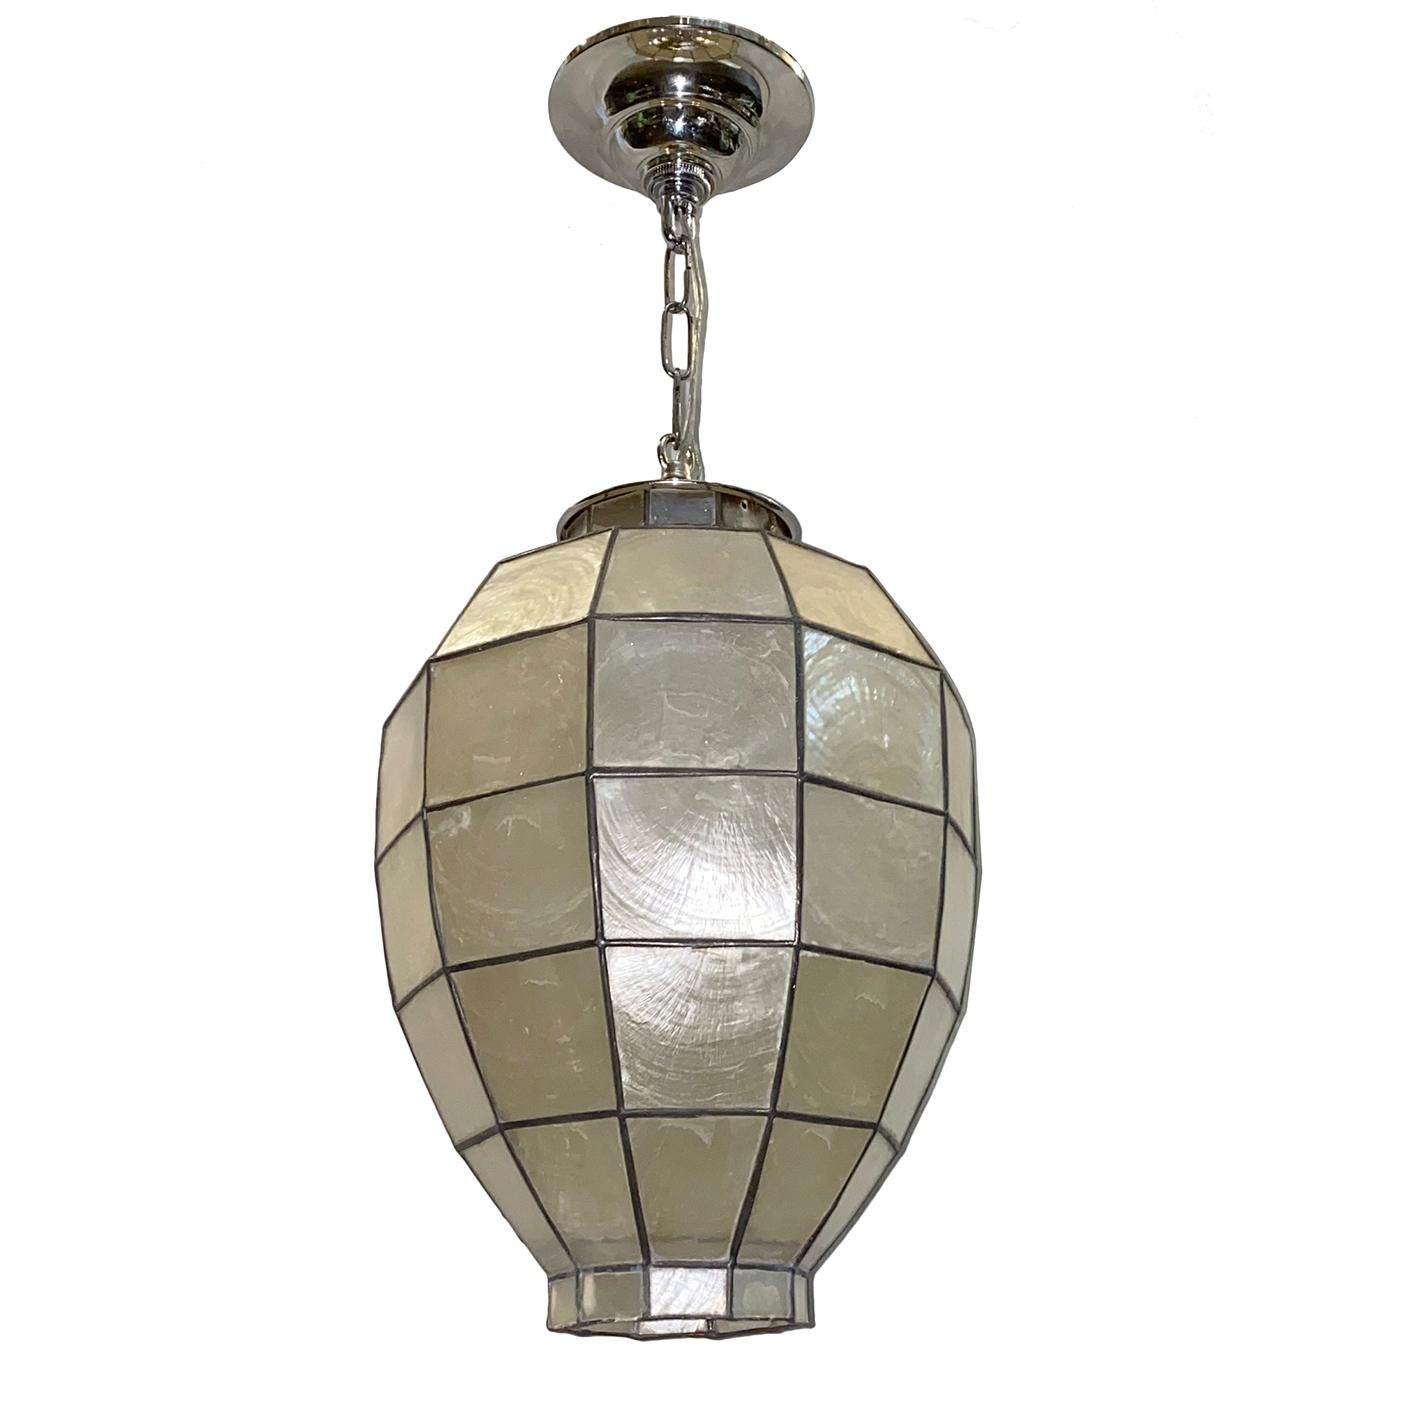 Plated French Midcentury Capiz Lantern For Sale